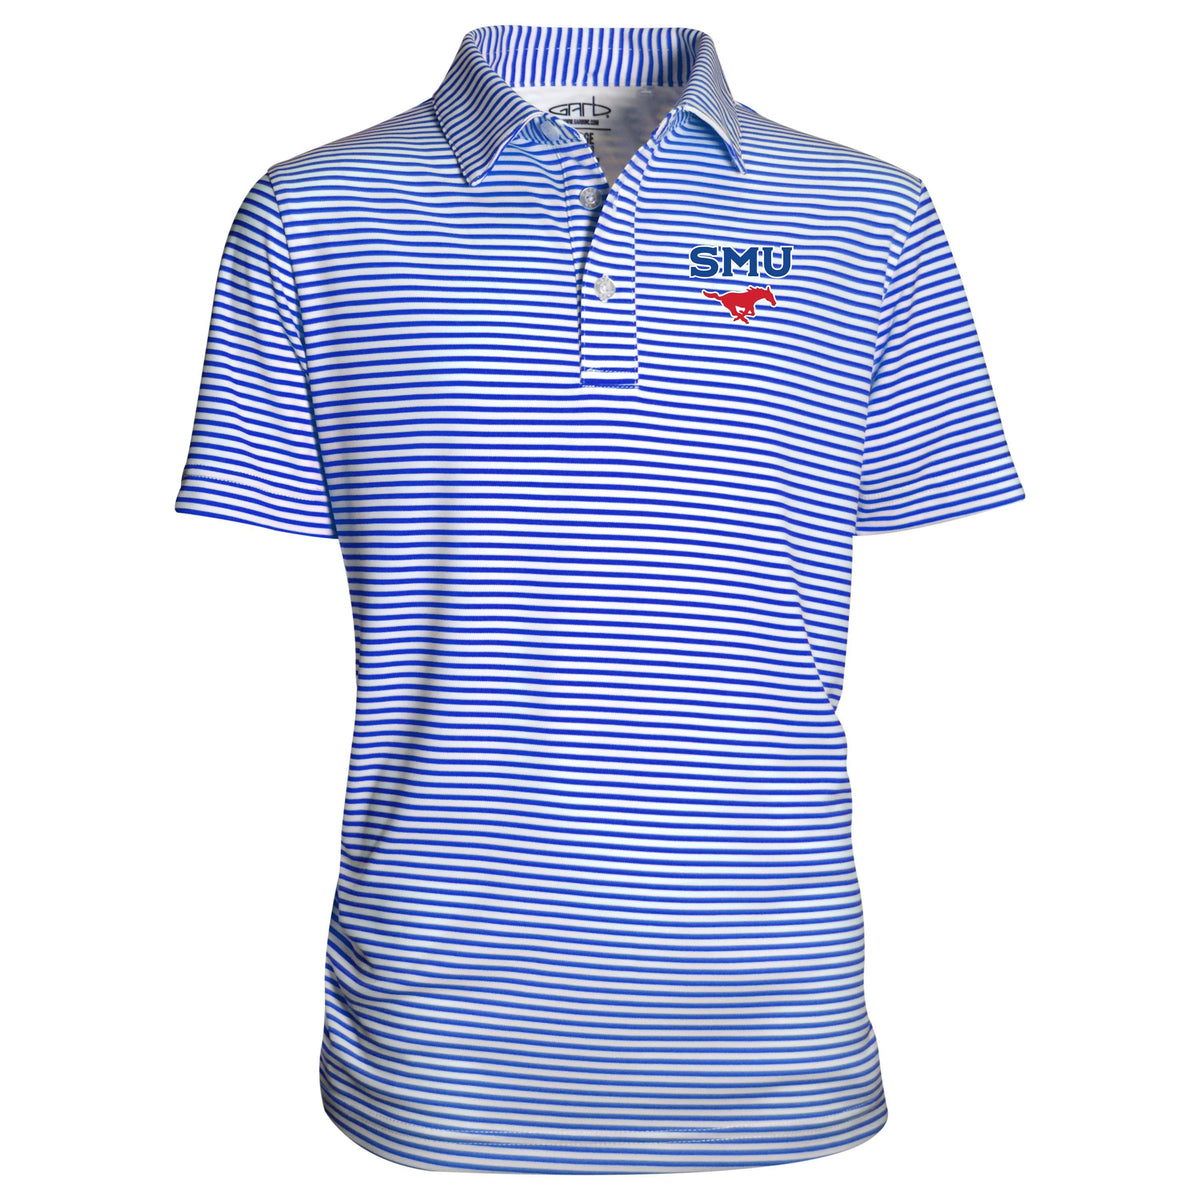 Southern Methodist Mustangs Youth Boys' Polo